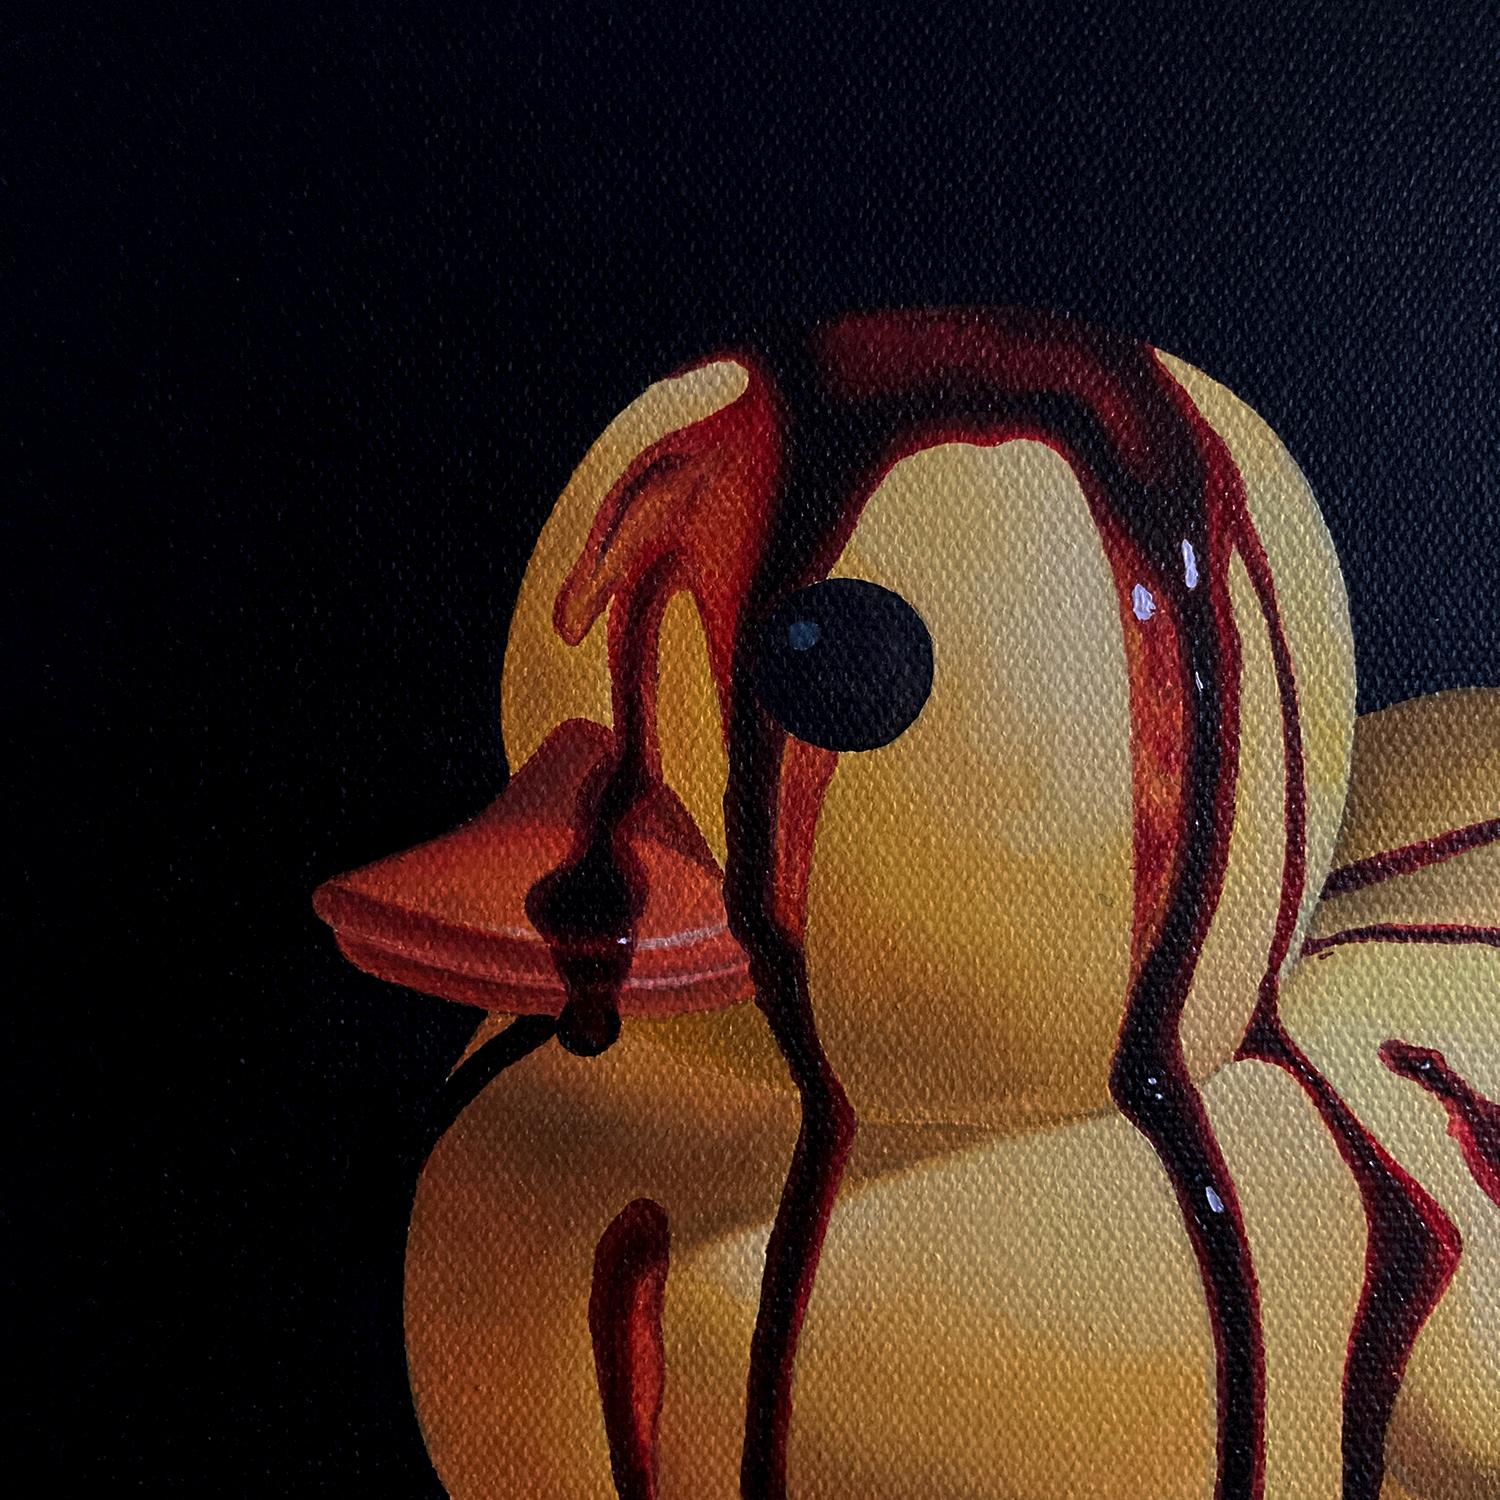 painting a rubber duck